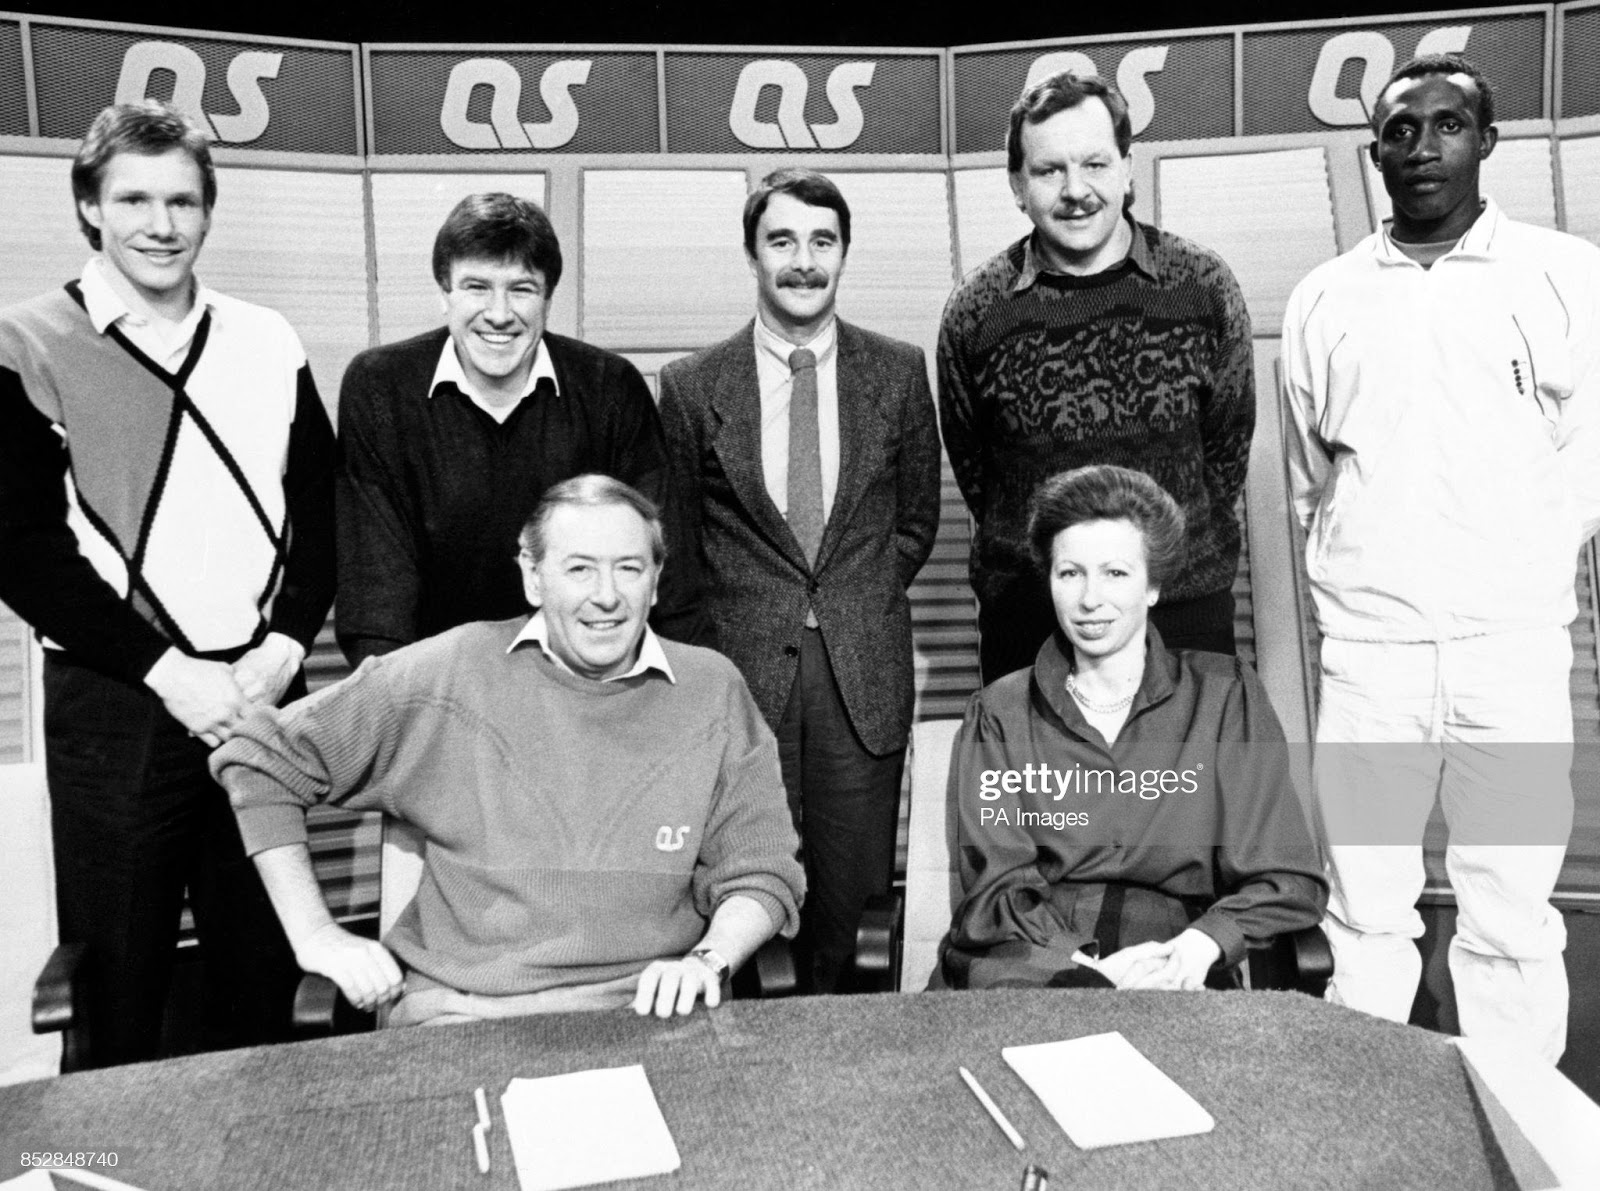 Princess Anne sits with presenter David Coleman at the recording of the 200th episode of A Question of Sport in Manchester on January 02, 1987. Her fellow participants were (l-r) John Rutherford, Emlyn Hughes, Nigel Mansell, Bill Beaumont and Linford Christie.